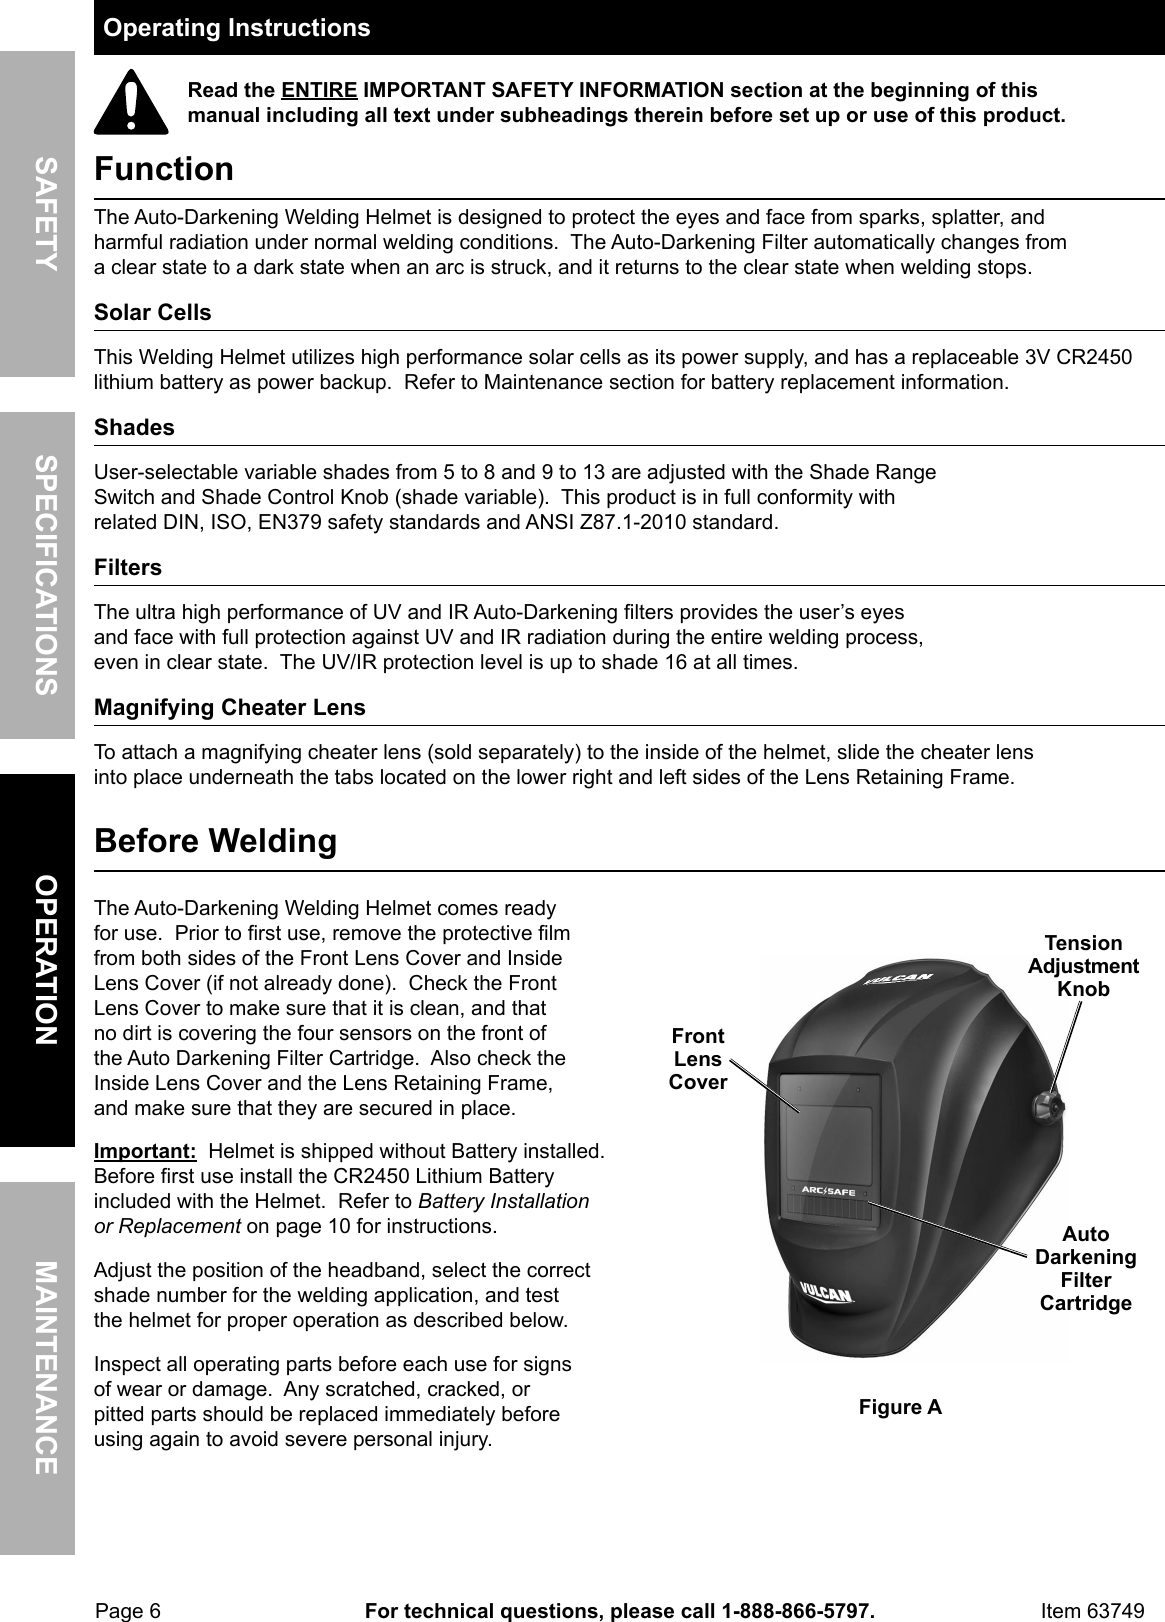 Page 6 of 12 - Manual For The 63749 Arc Safe™ Auto Darkening Welding Helmet